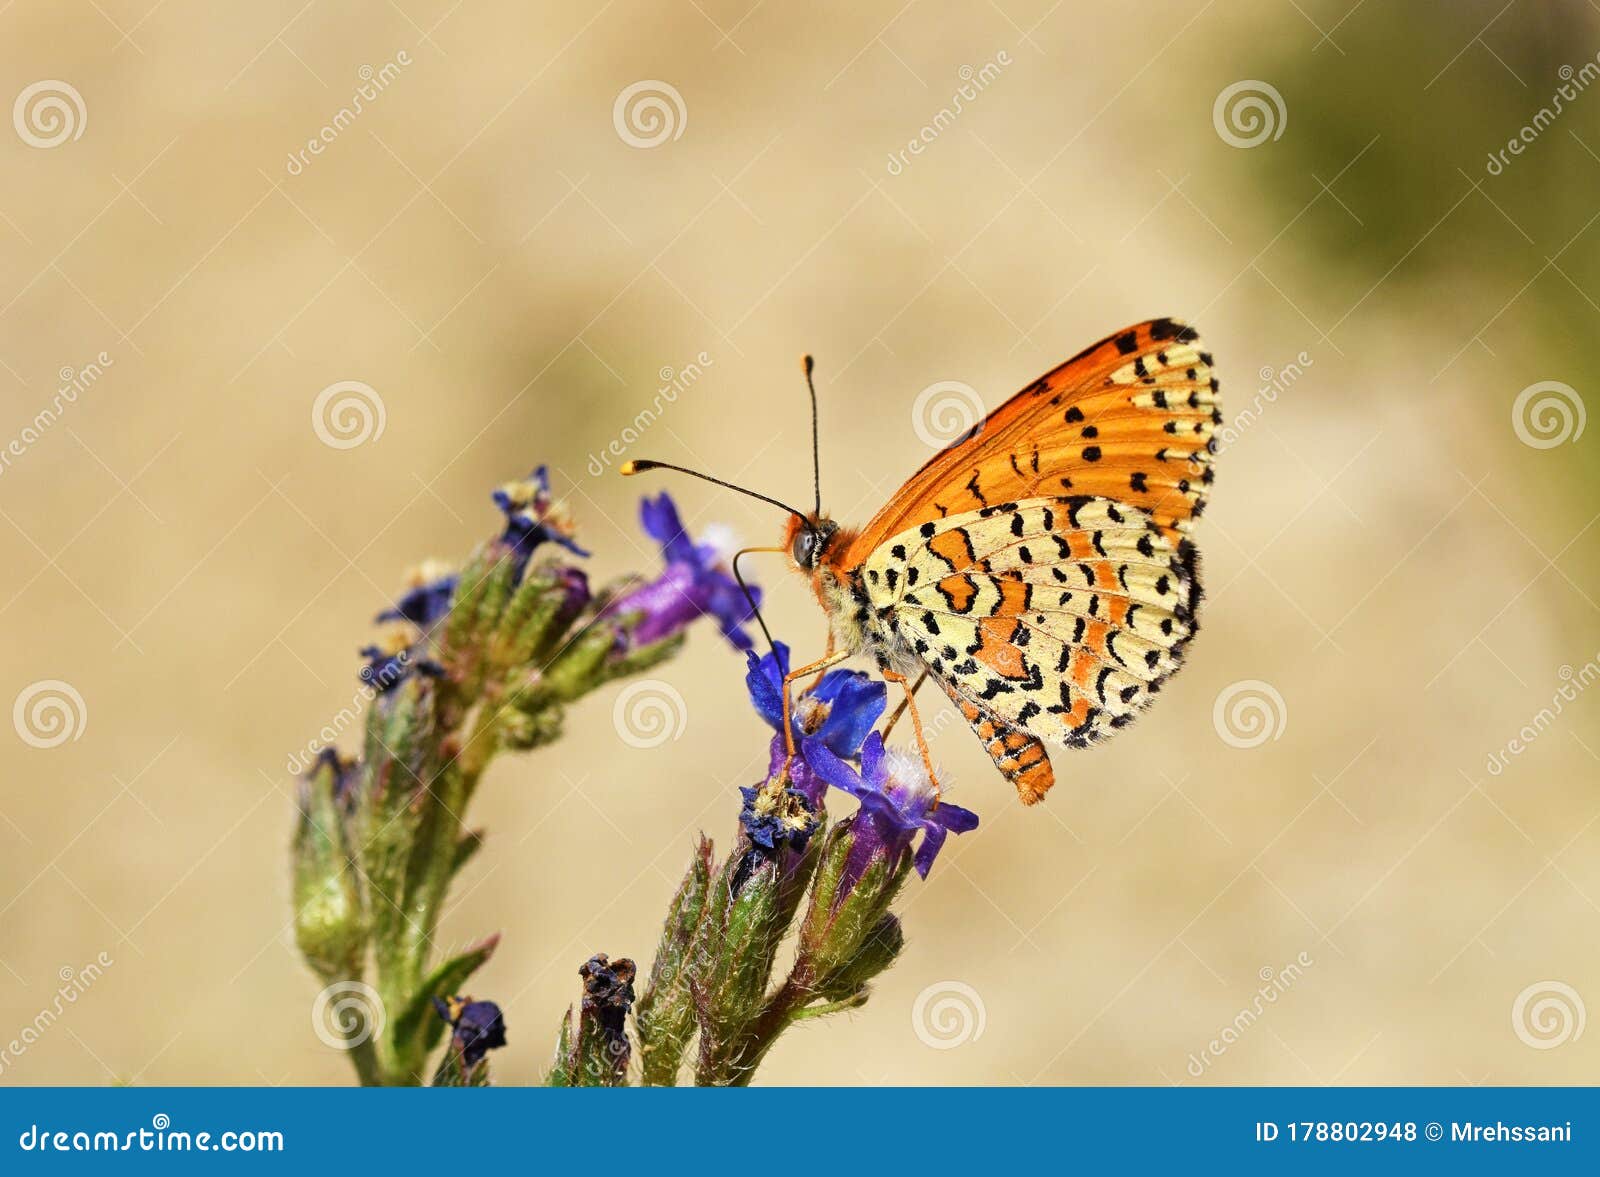 melitaea gina butterfly on blue flower in pale background , butterflies of iran